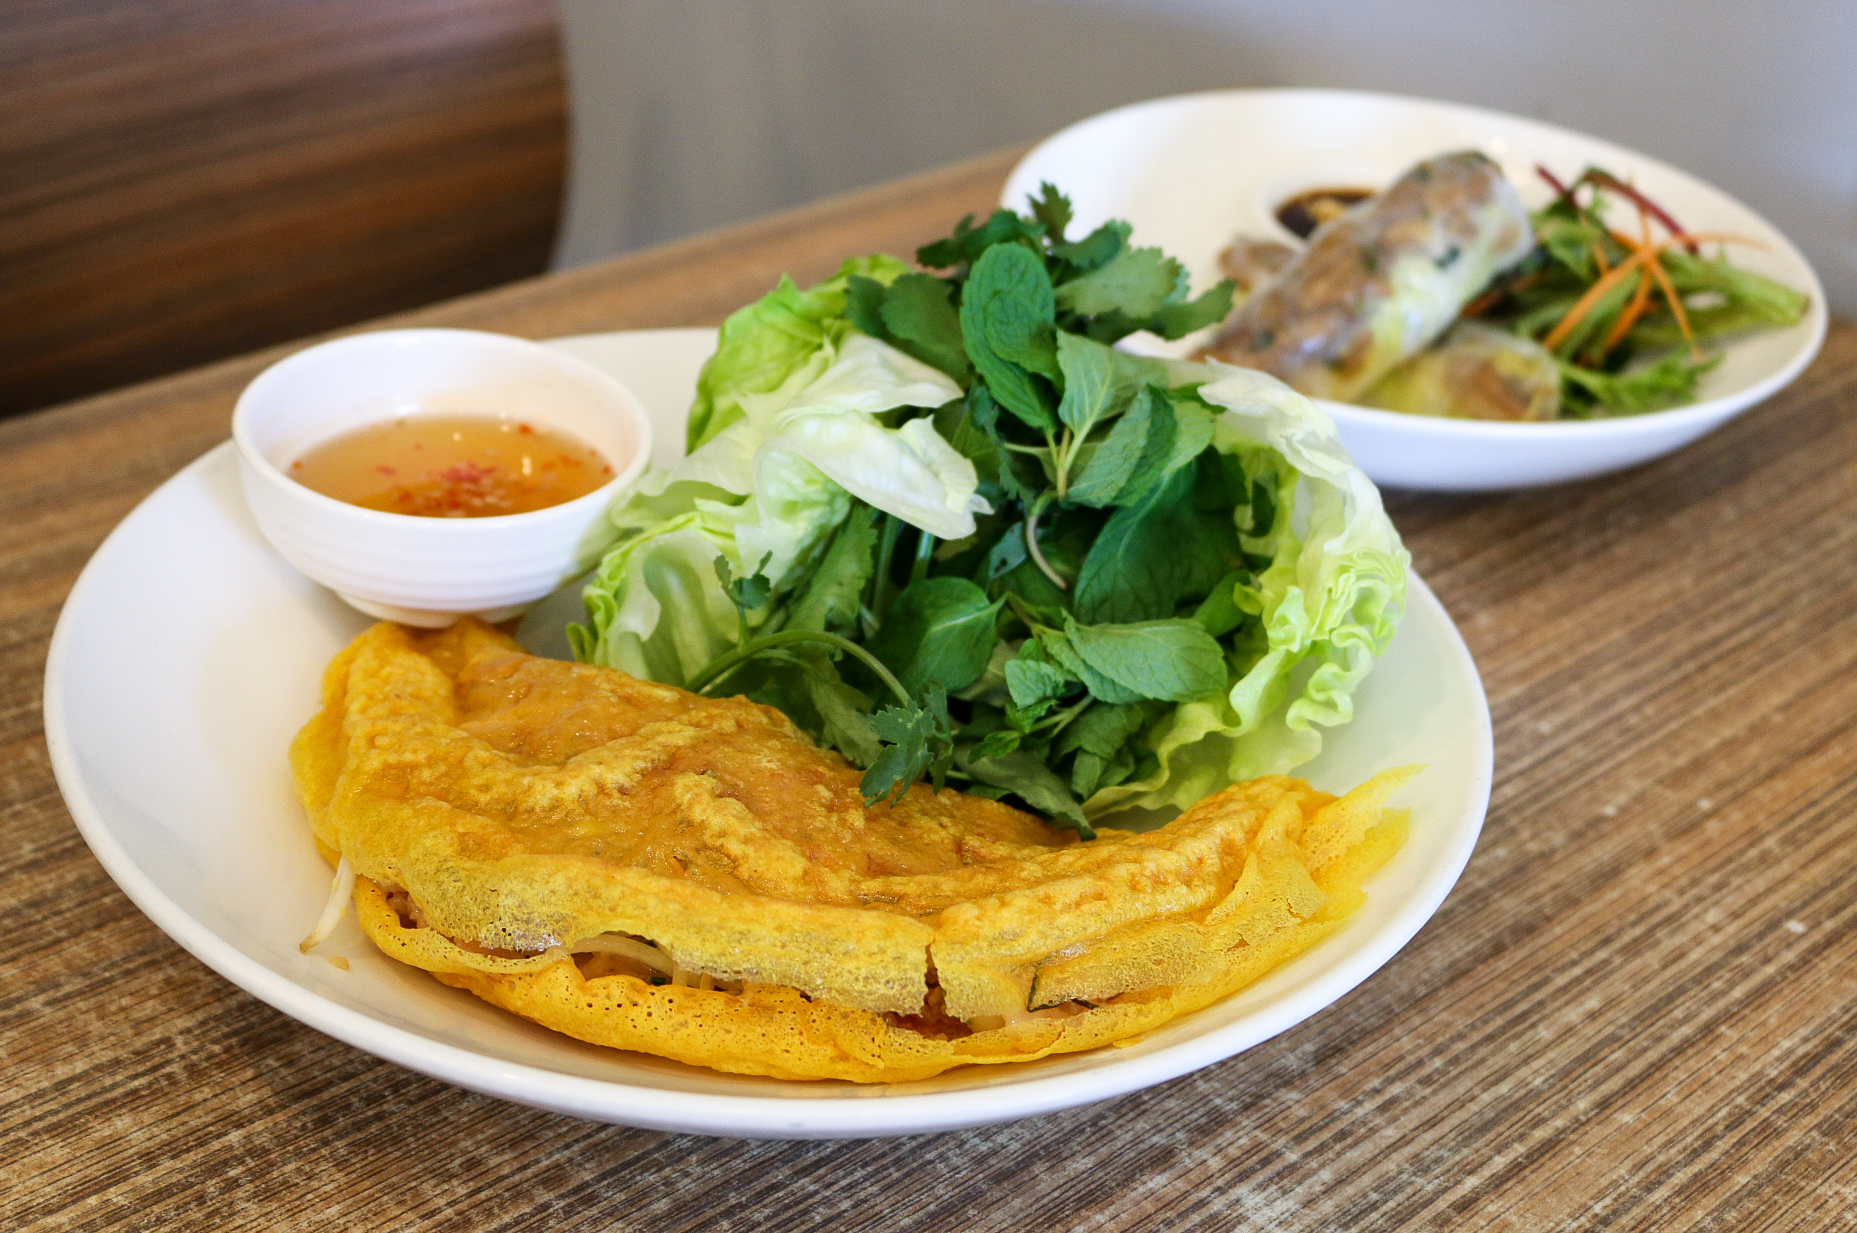 Hot in the City: Bui’s Restaurant brings the flavours of Vietnam to Kingston